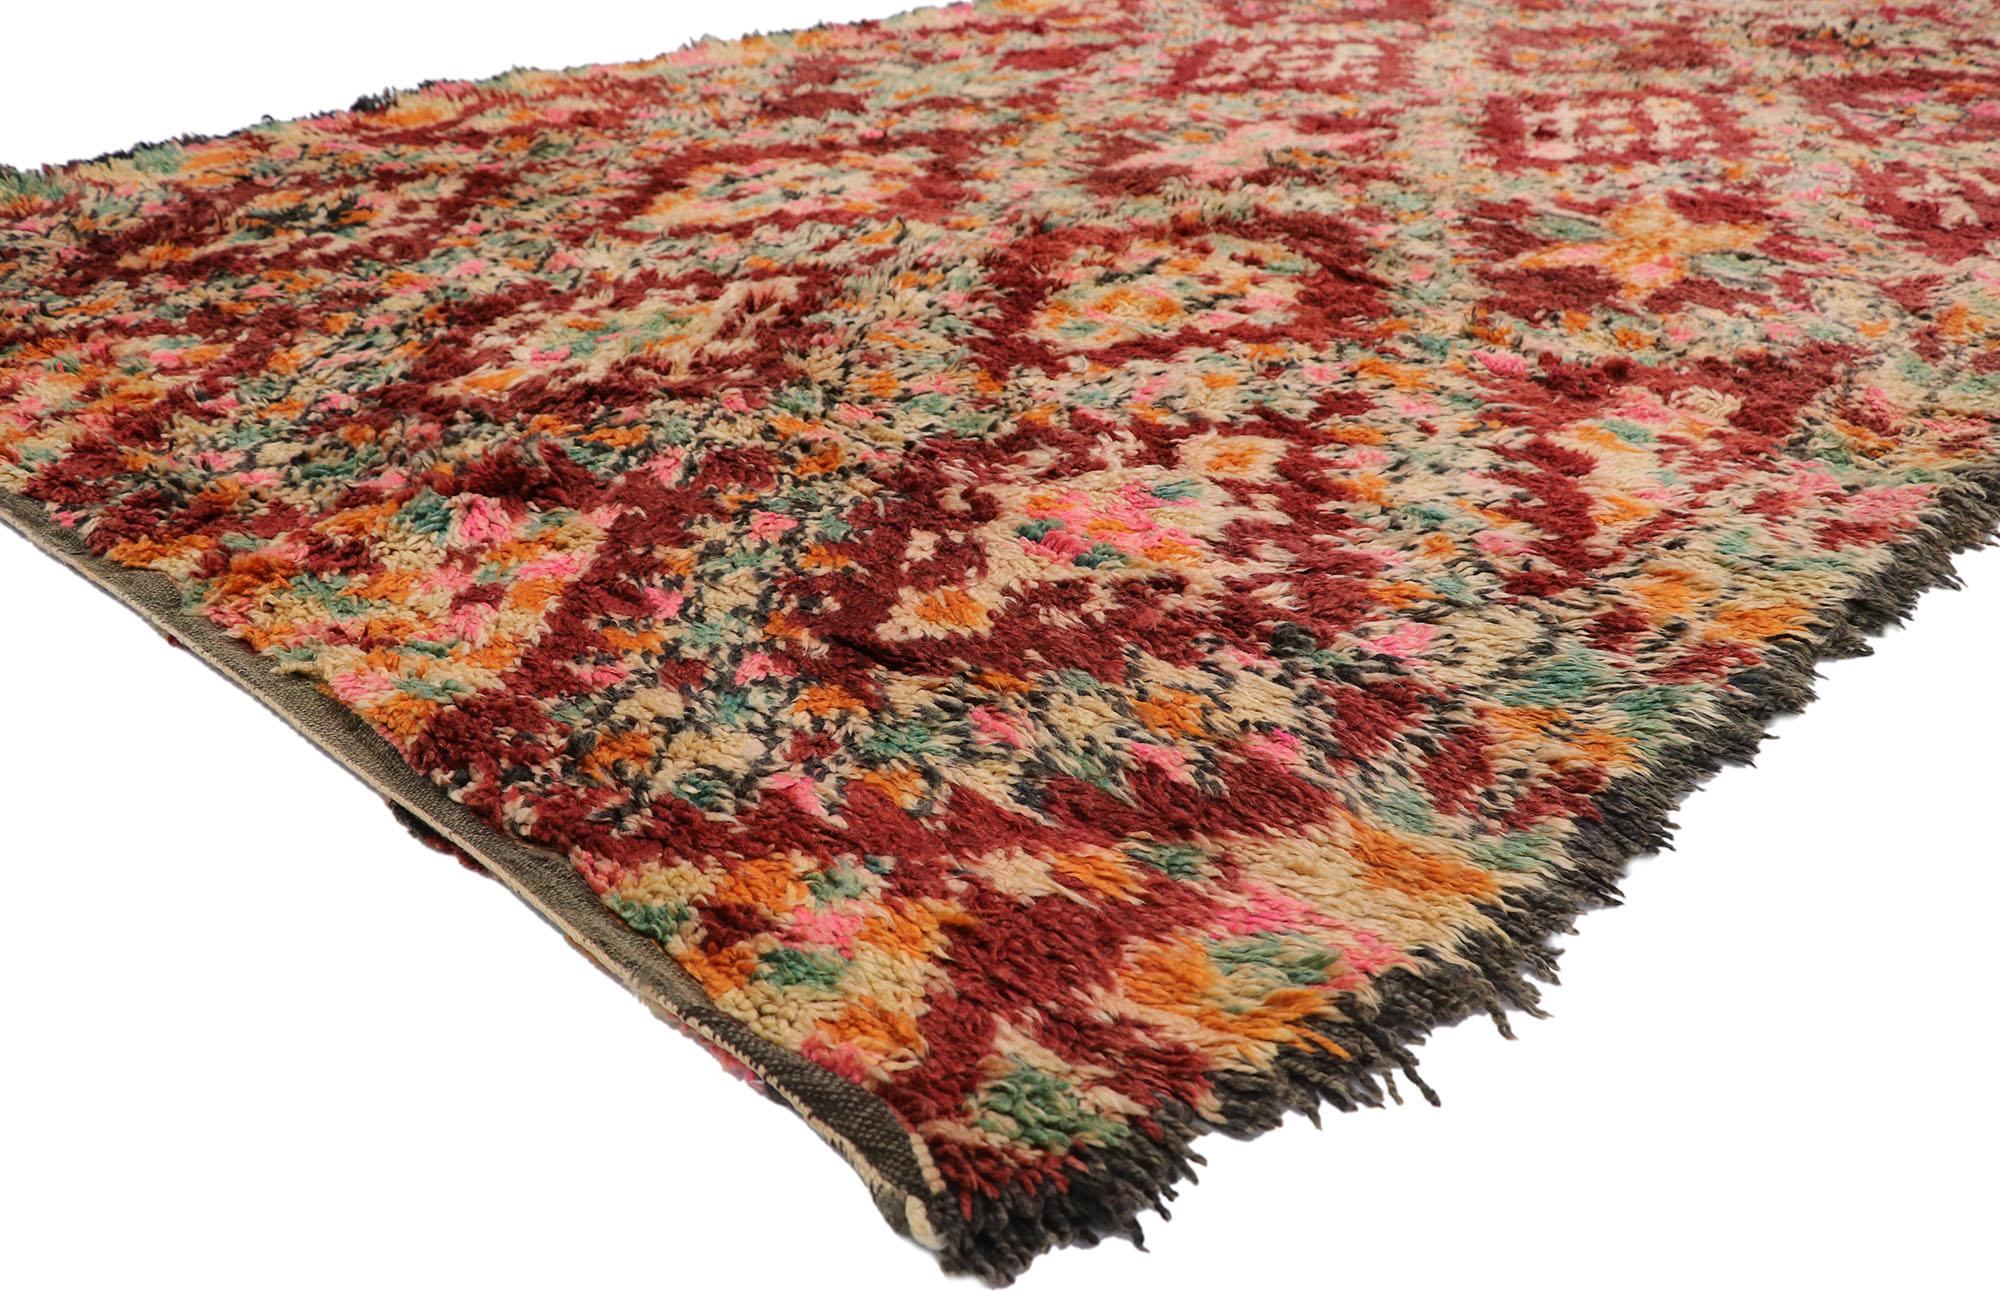 21195 Vintage Berber Beni M'Guild Moroccan rug with Bohemian Style 06'05 x 11'06. Showcasing a bold expressive design, incredible detail and texture, this hand knotted wool vintage Berber Beni M'Guild Moroccan rug is a captivating vision of woven